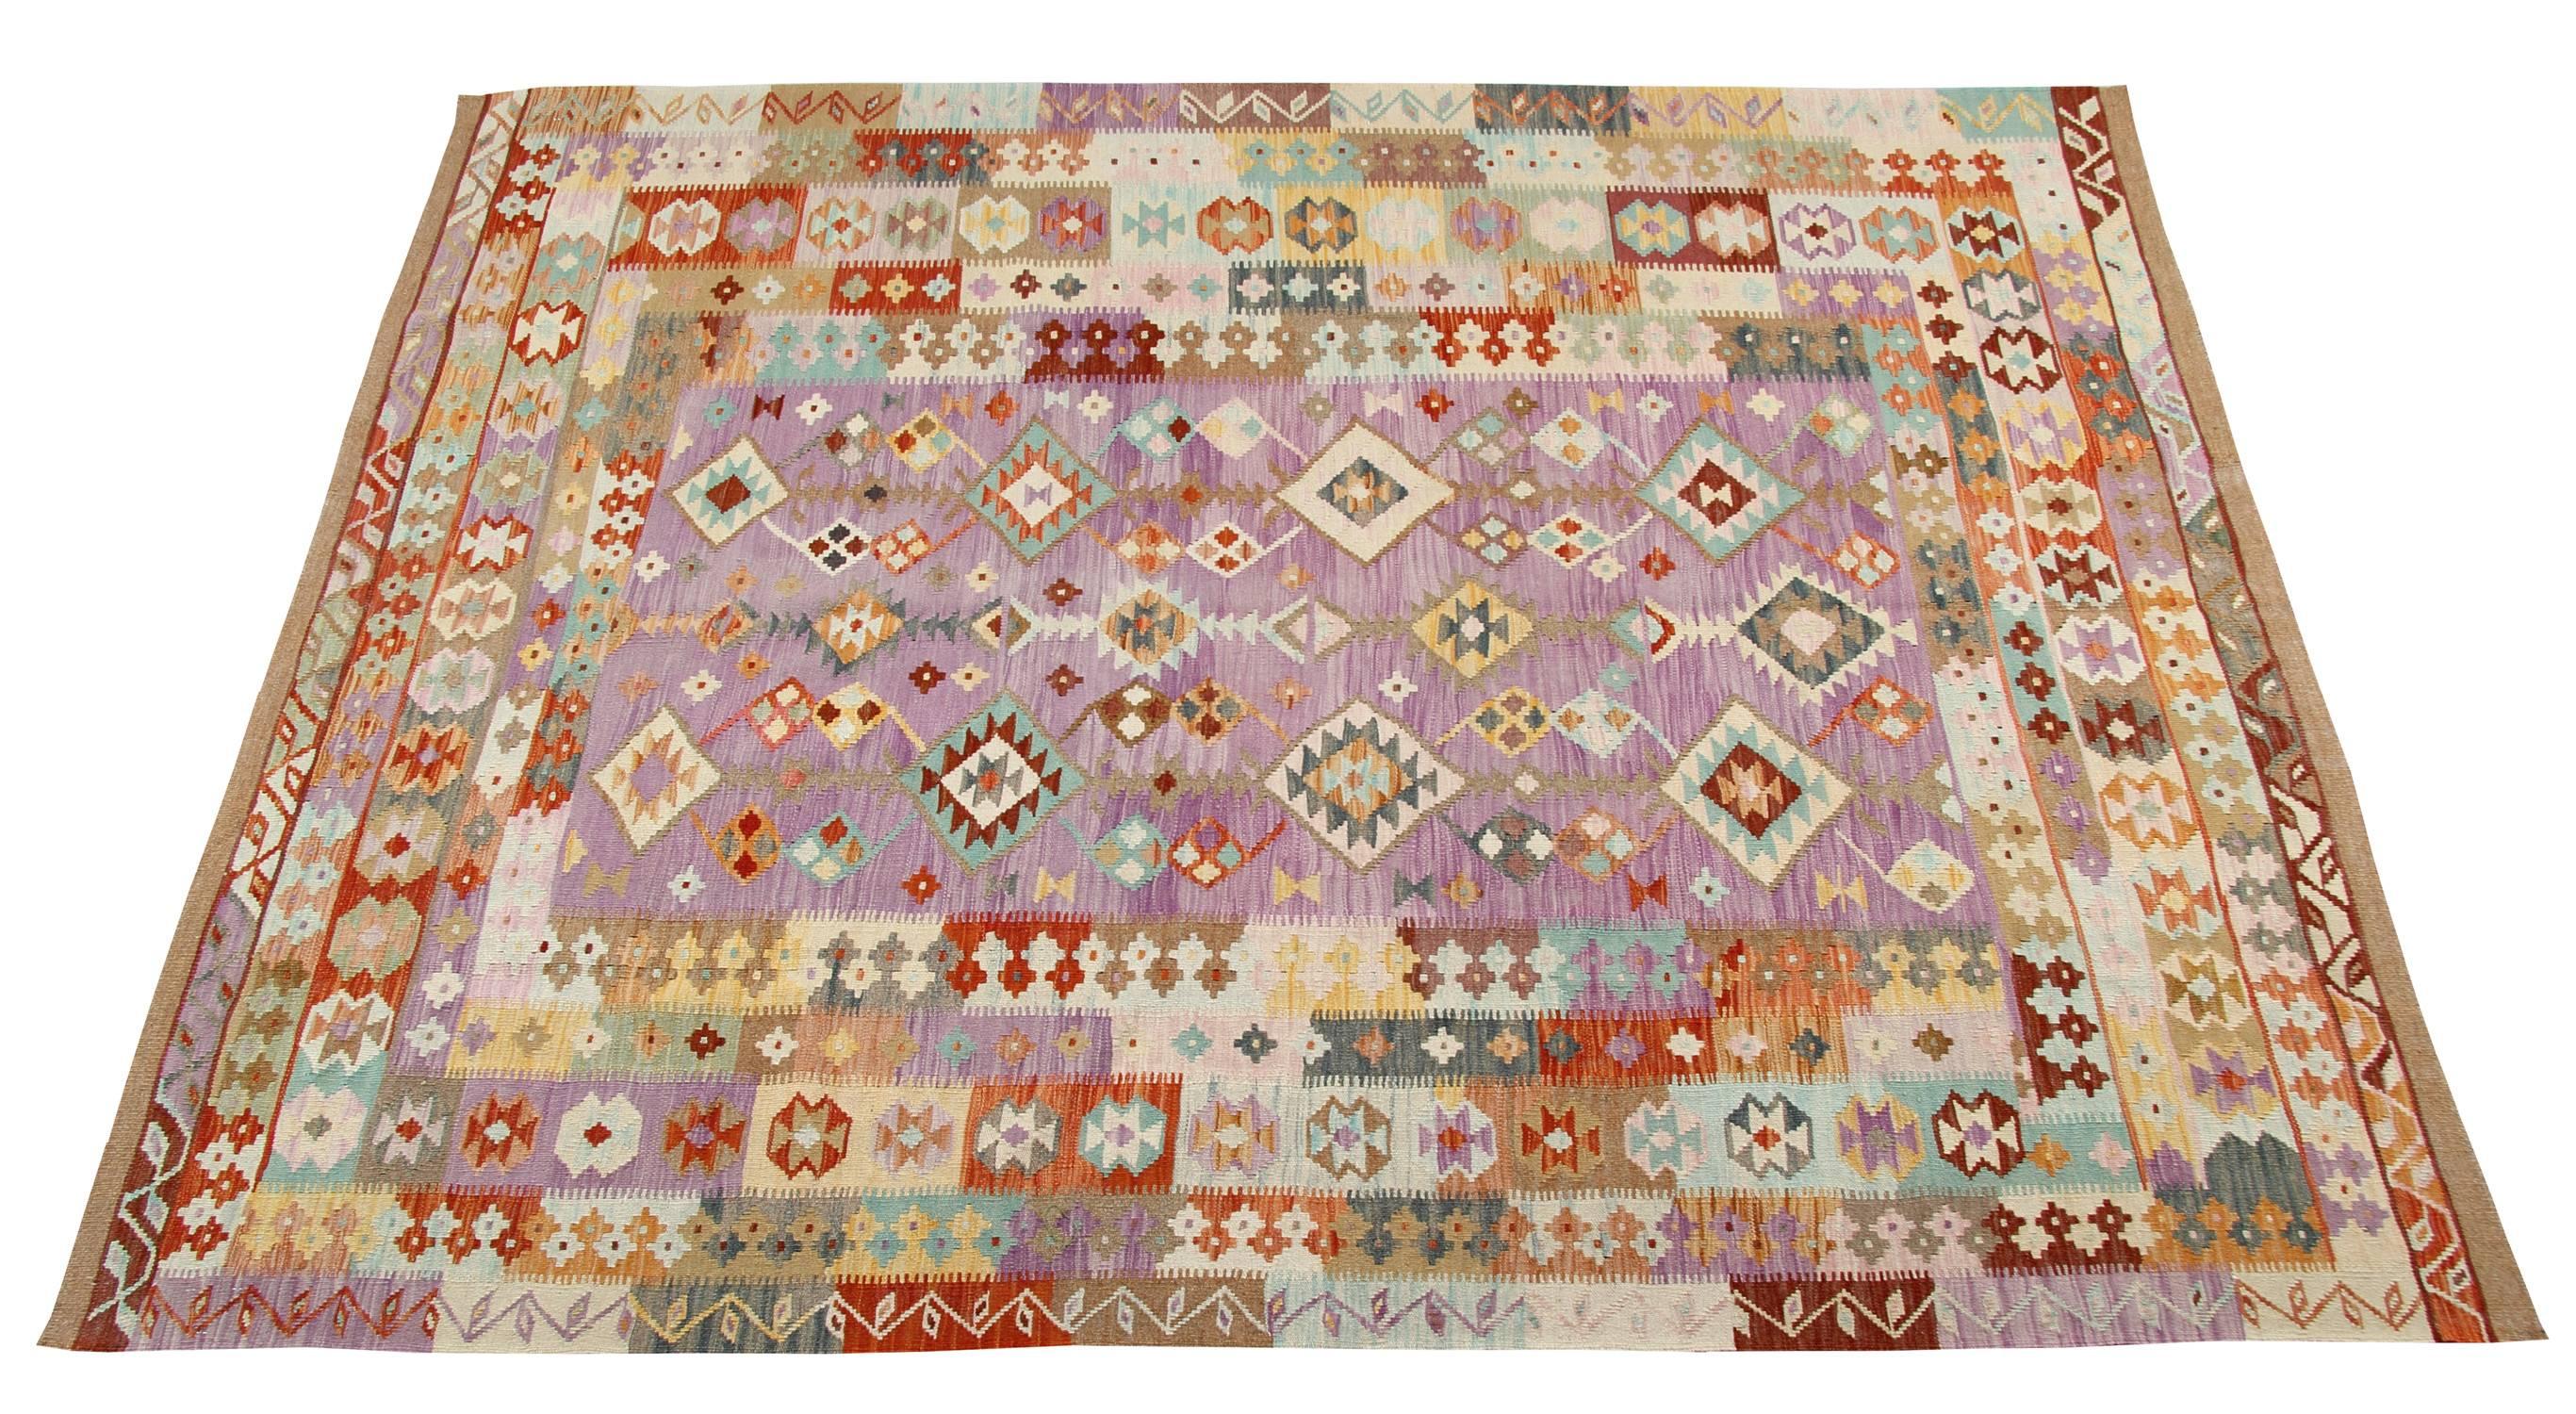 This flat-weave rug is new traditional Kilim rugs and a fascinating wool rug. In fact, it reports the designs of the traditional rugs but the manufacturer is new: it was geometric rug handmade in Afghanistan and uses tribal rug motifs. This purple